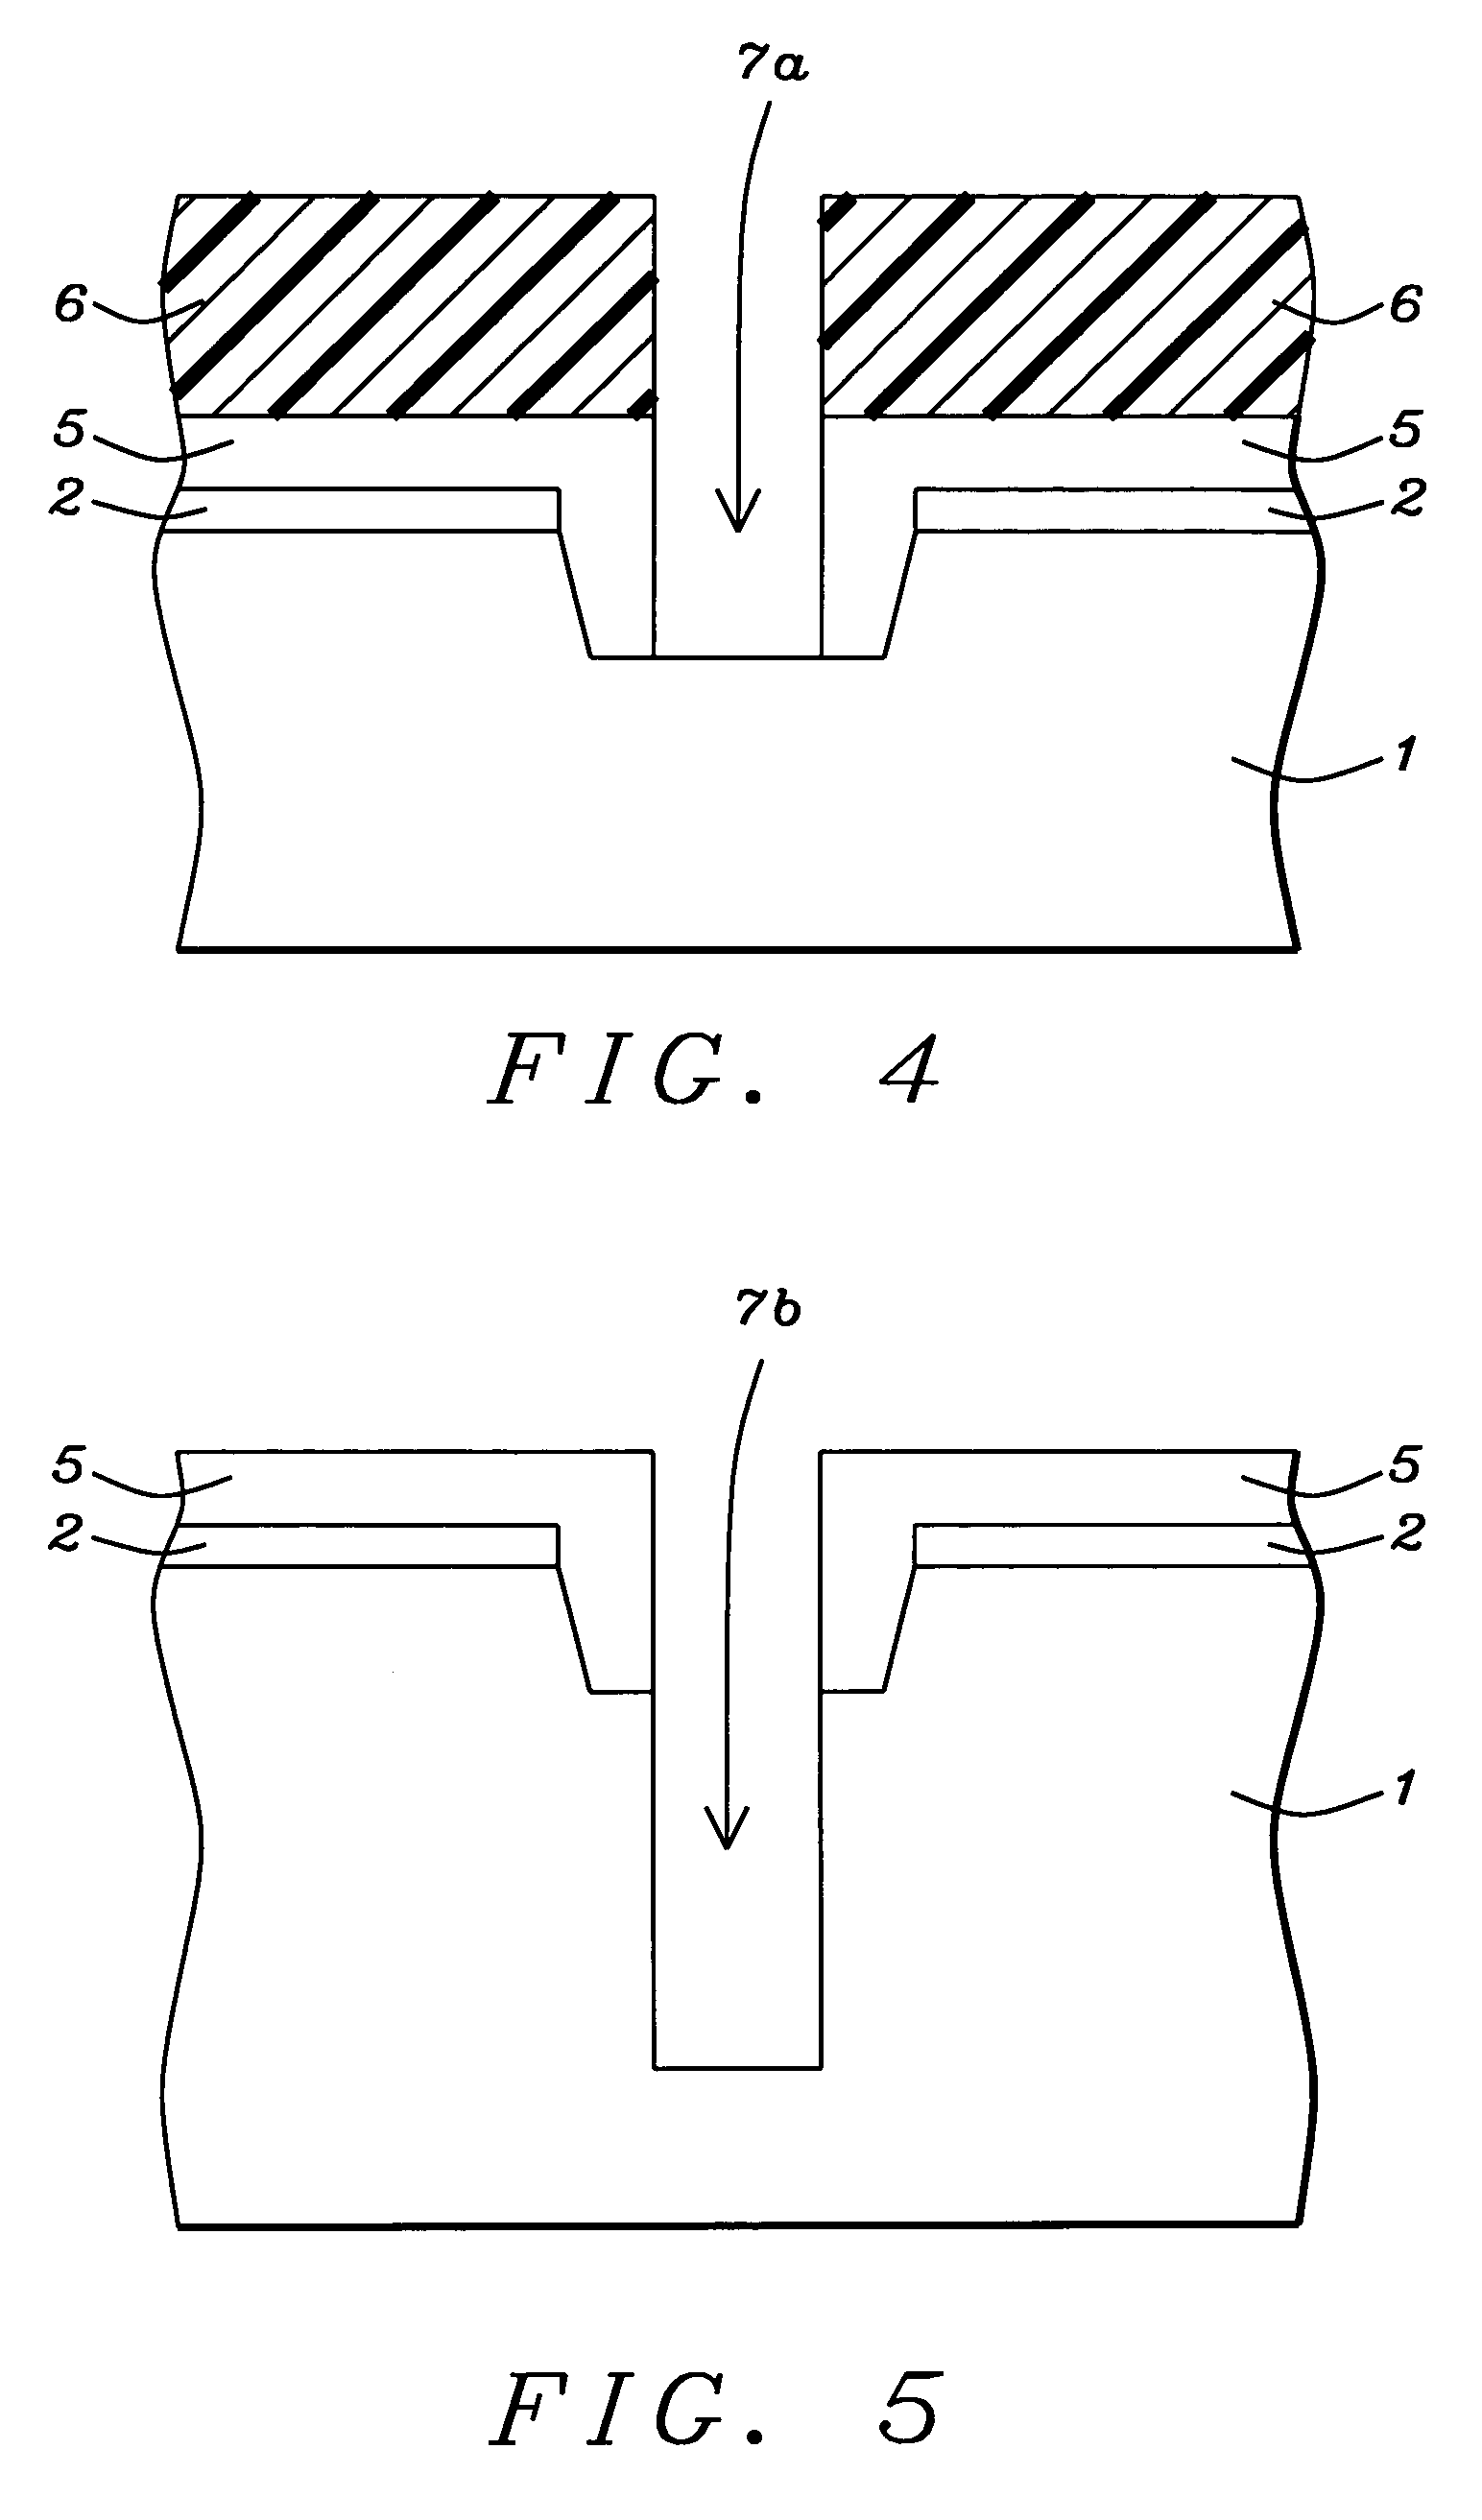 Method of forming a shallow trench-deep trench isolation region for a BiCMOS/CMOS technology